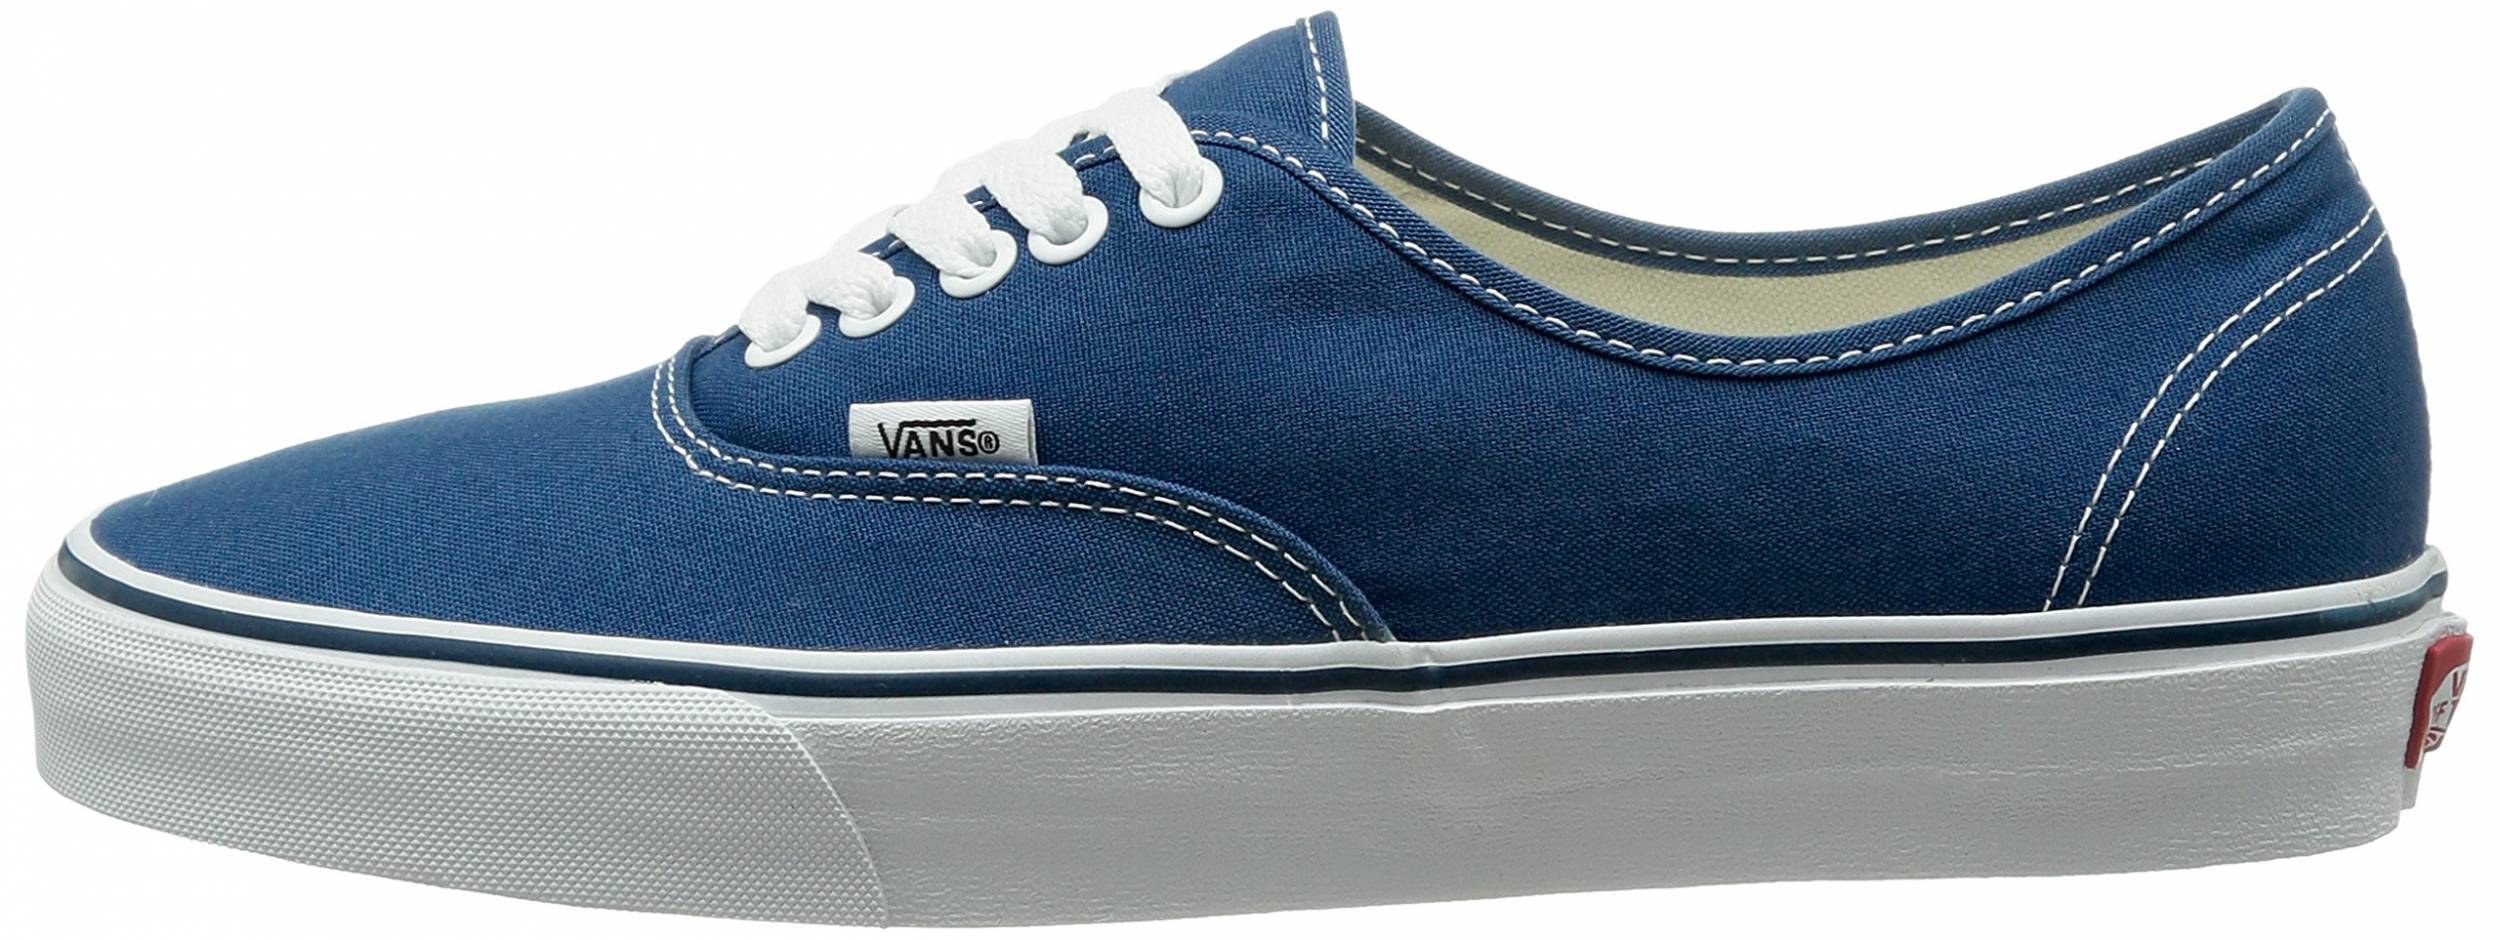 vans shoes dark blue and white